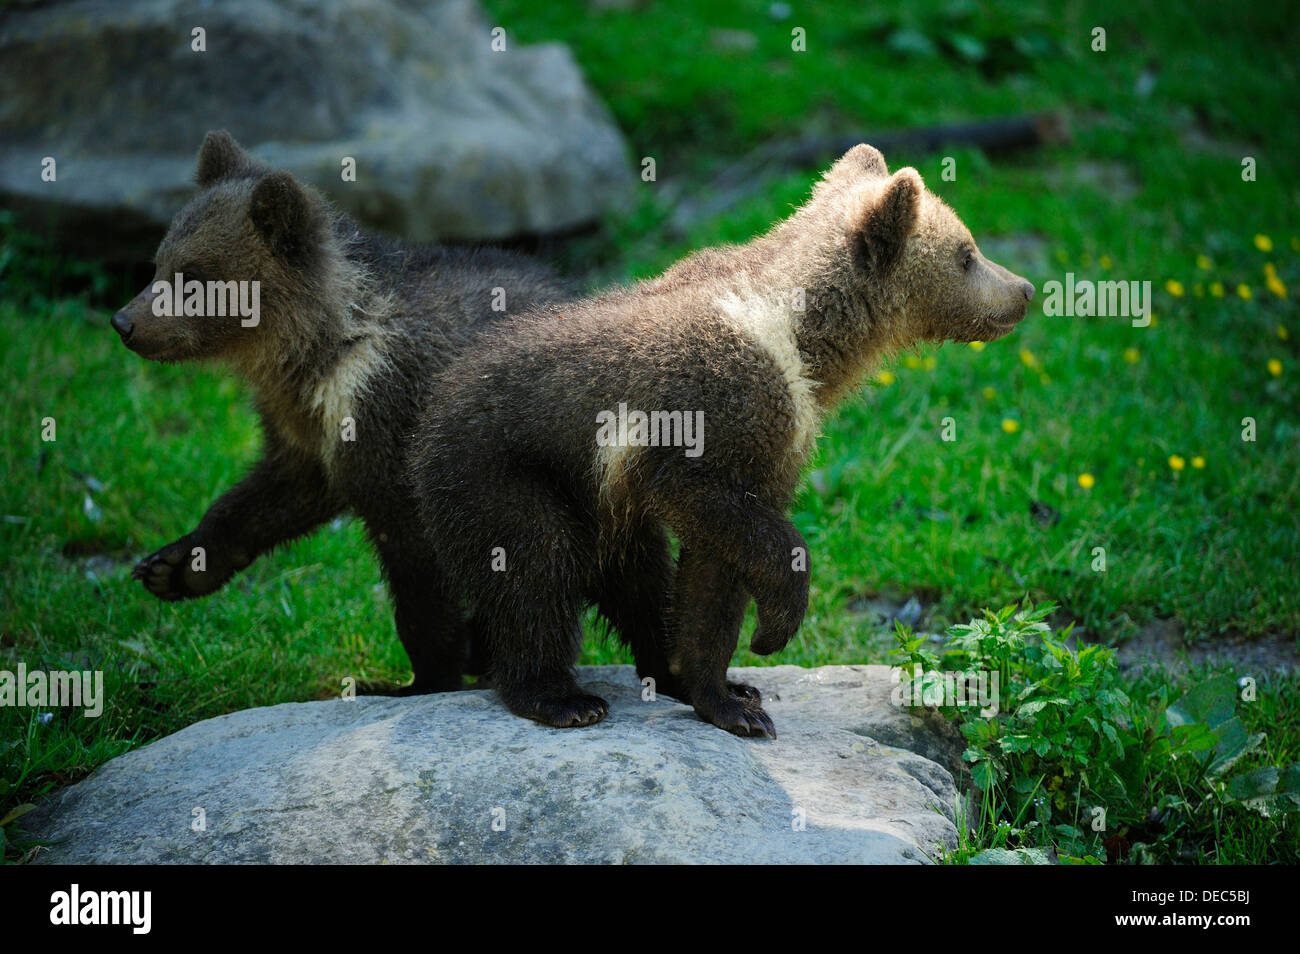 Two Brown Bears (Ursus arctos), cubs, 4 months, passing one another while taking a tour of discovery through their enclosure Stock Photo